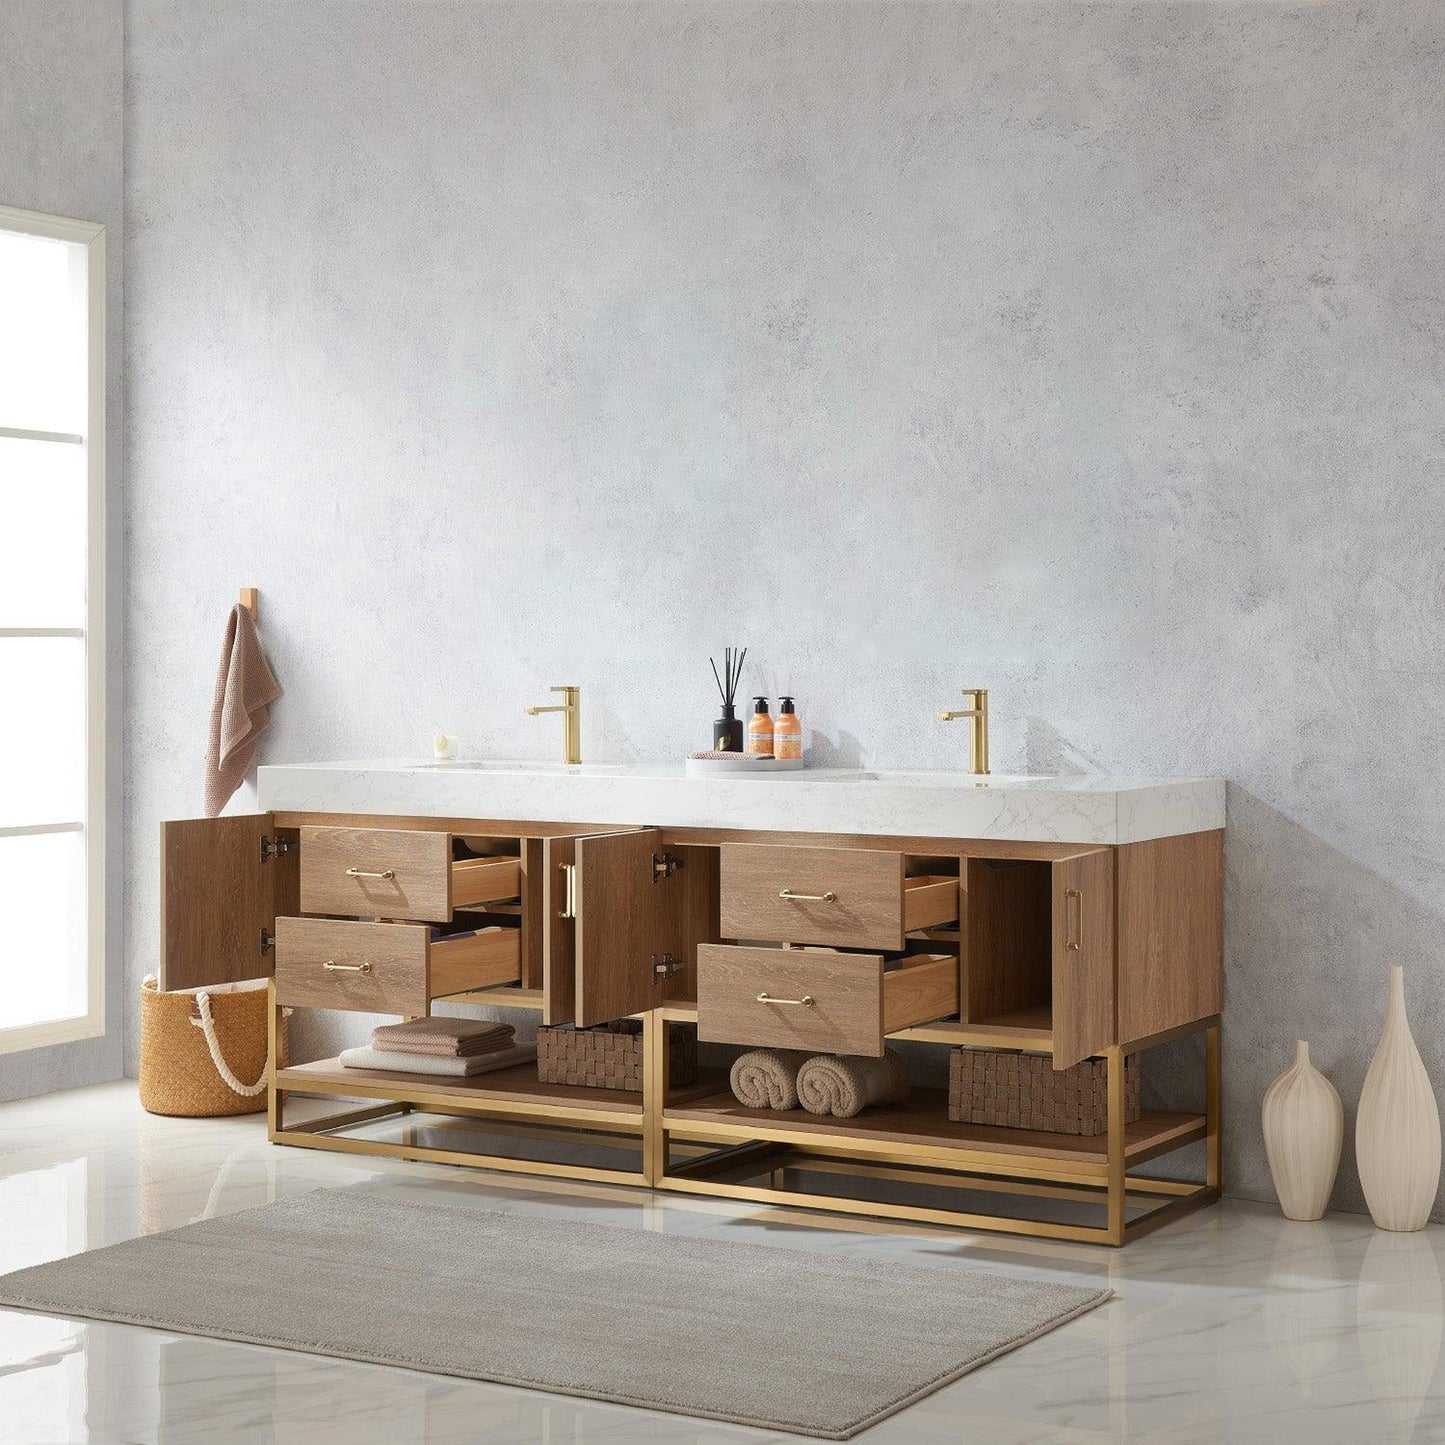 Vinnova Alistair 84" Double Sink Bath Vanity In North American Oak And Brushed Gold Finish With White Grain Stone Countertop